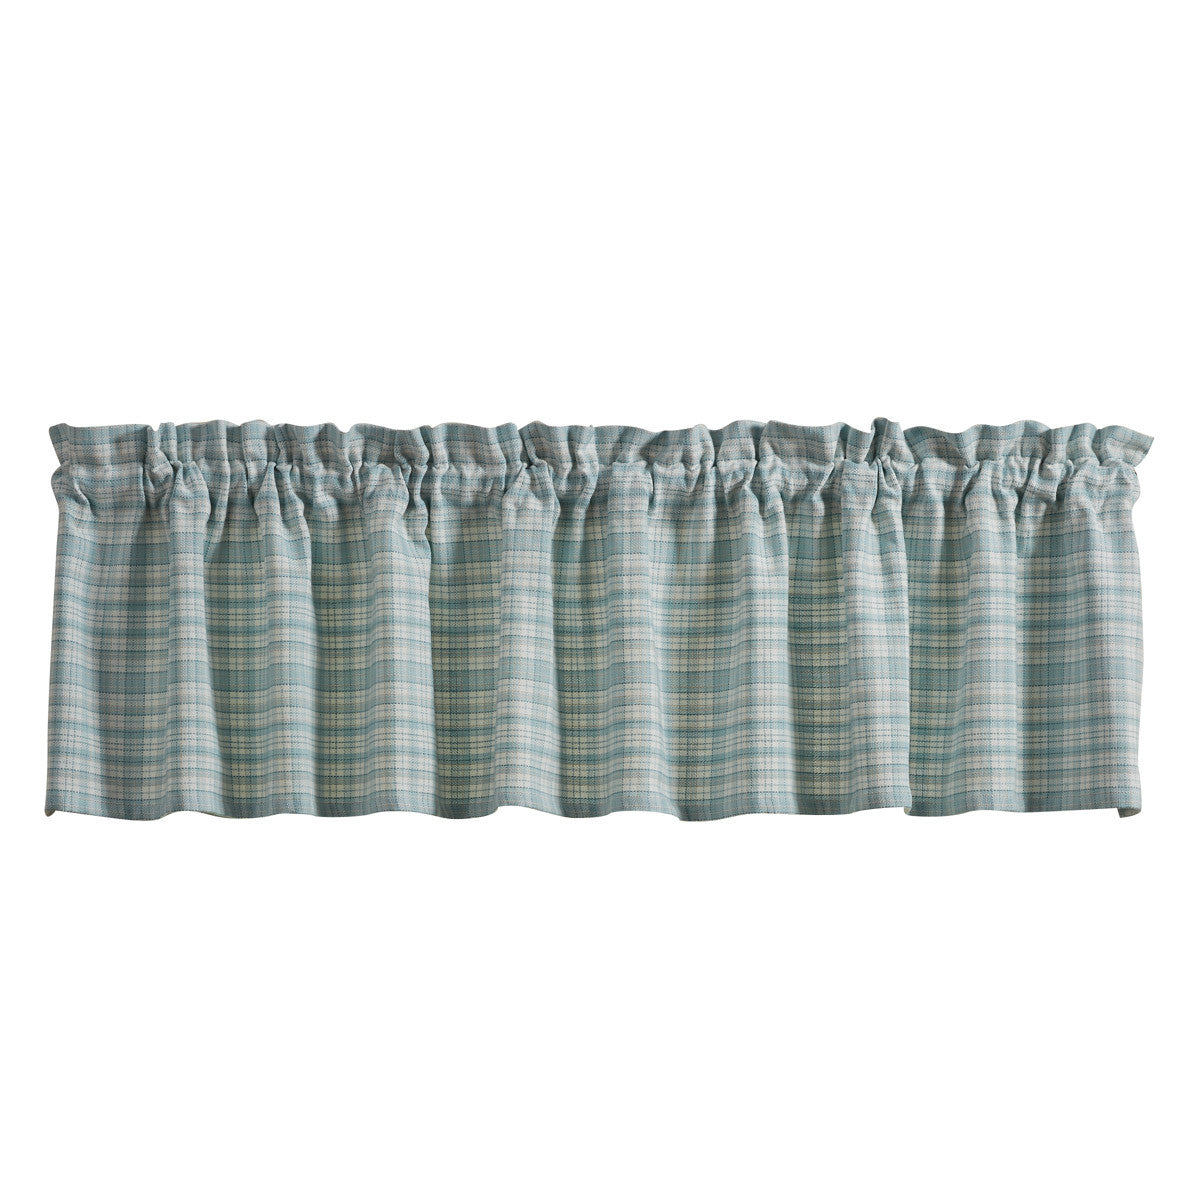 Relaxed Retreat Valance